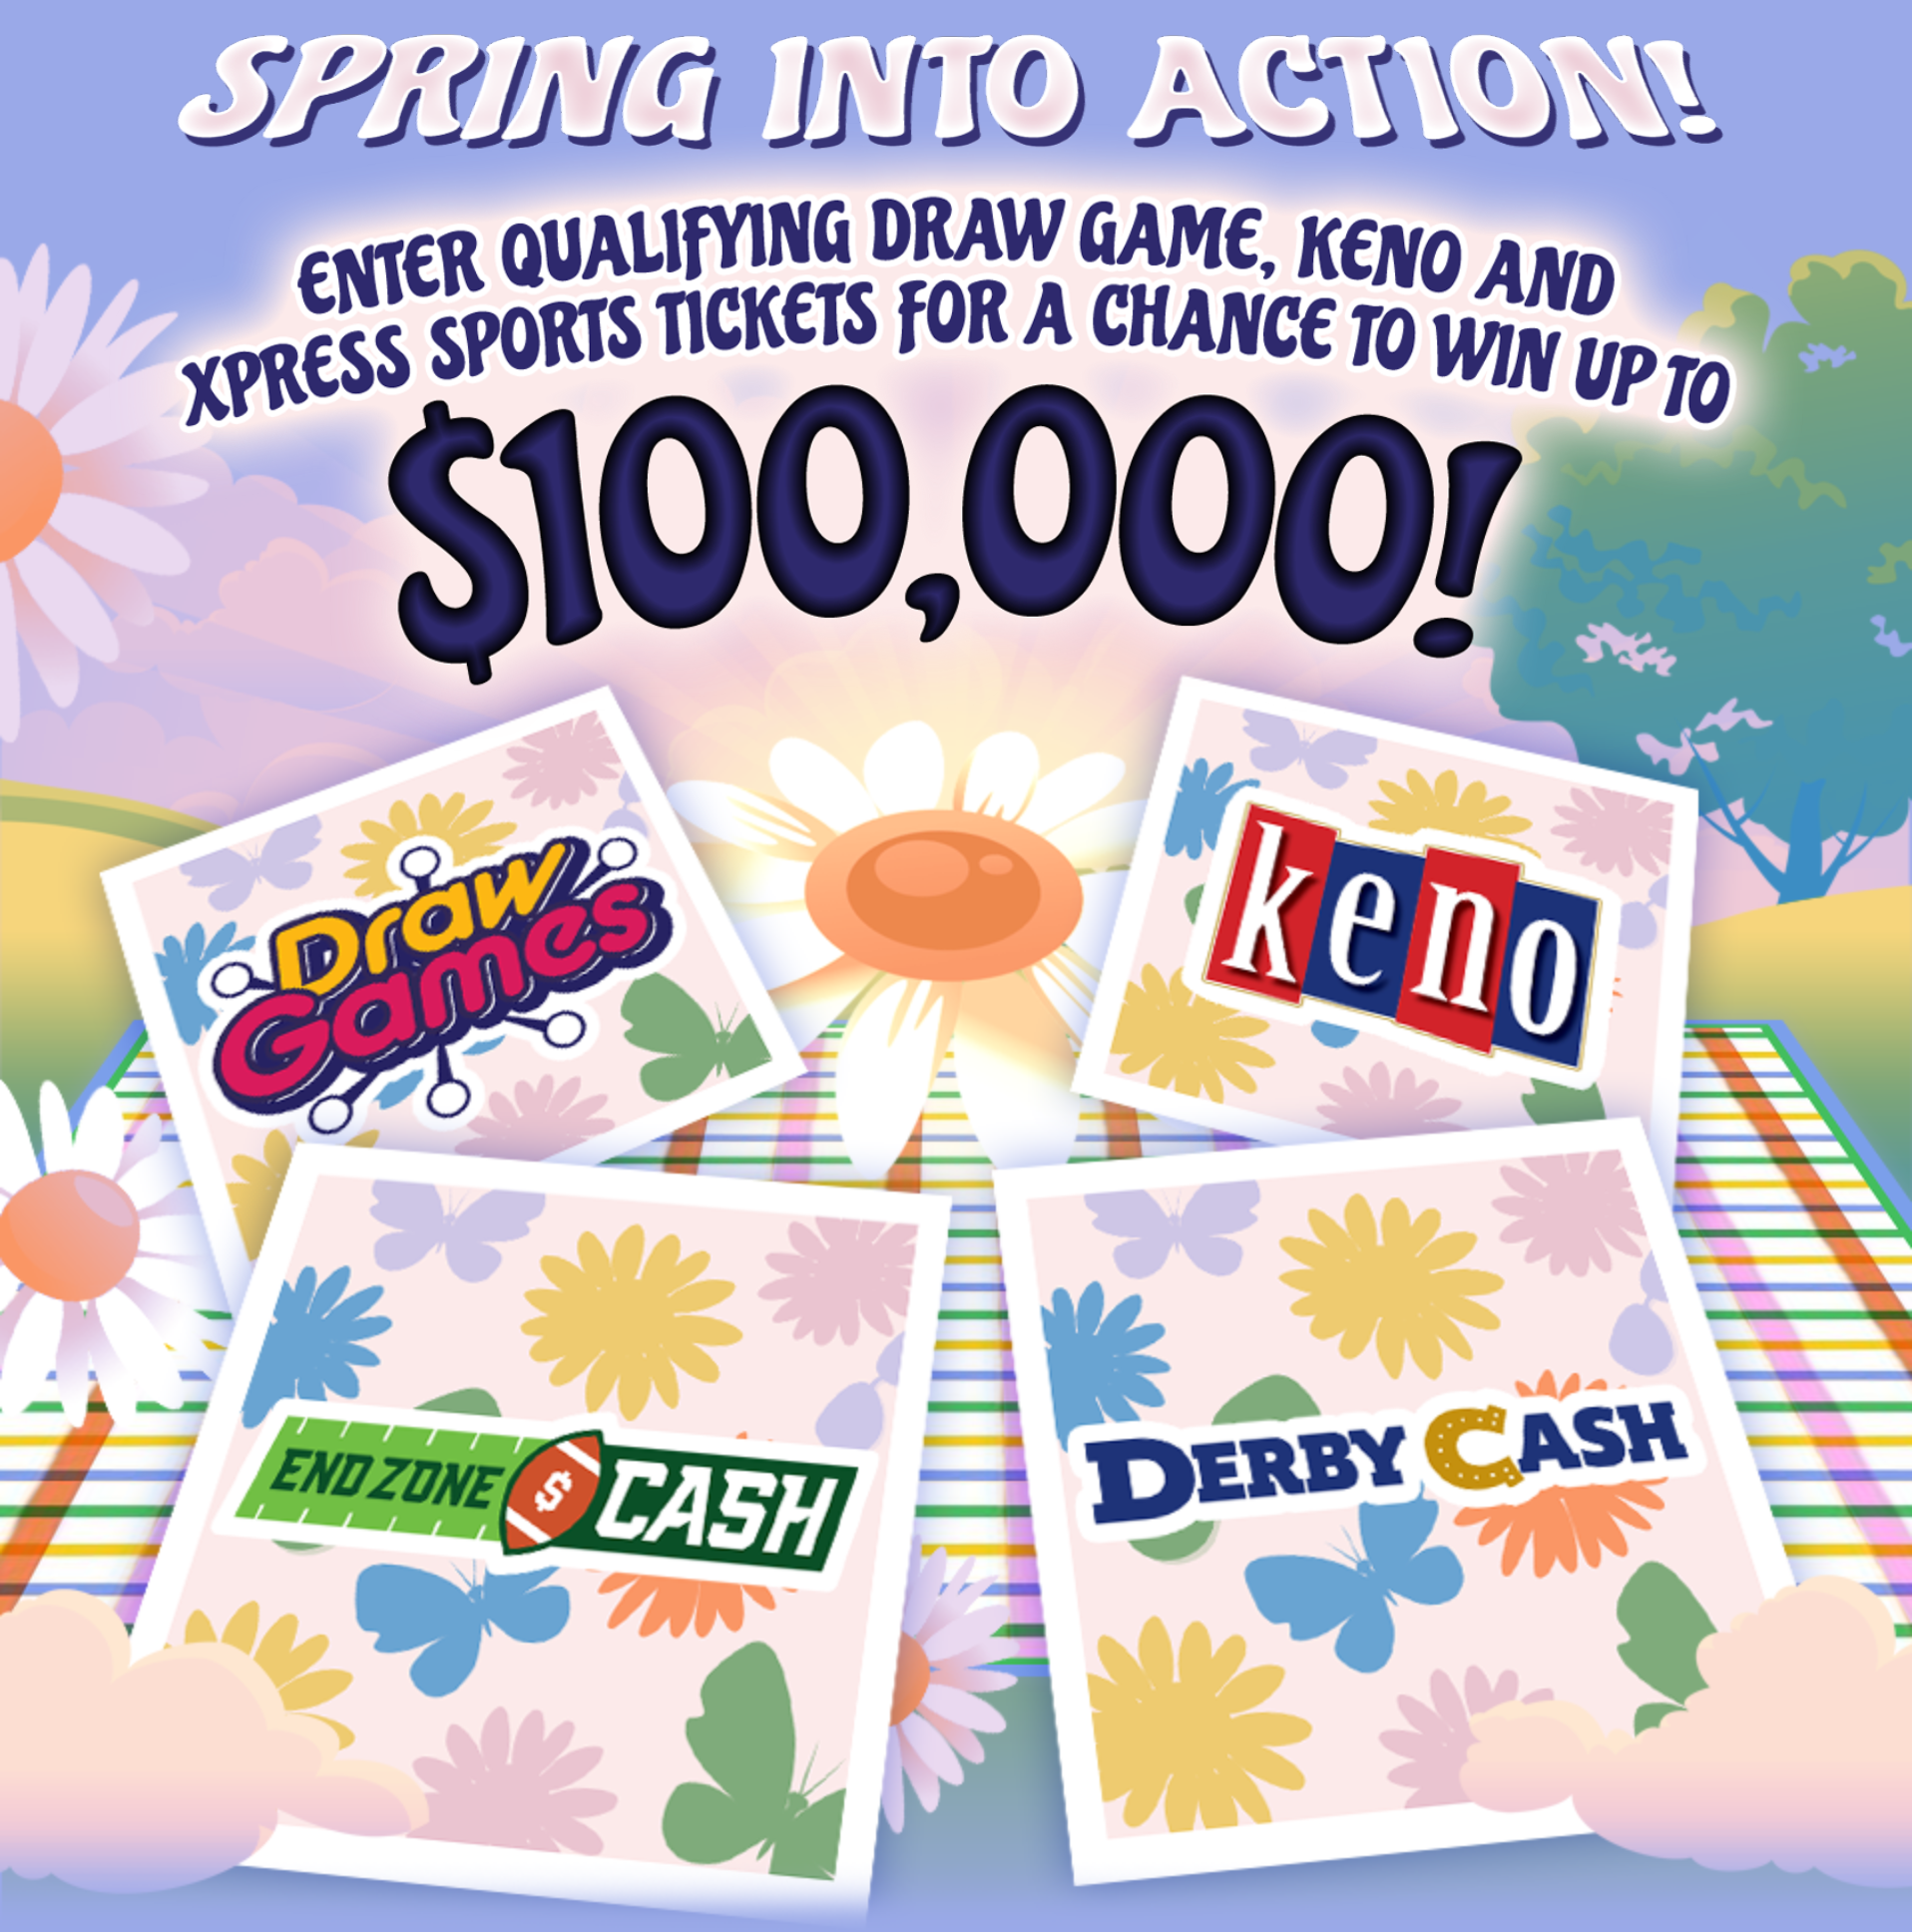 Enter qualifying Draw Game, Keno and Xpress Sports tickets for a chance to win up to $100,000!